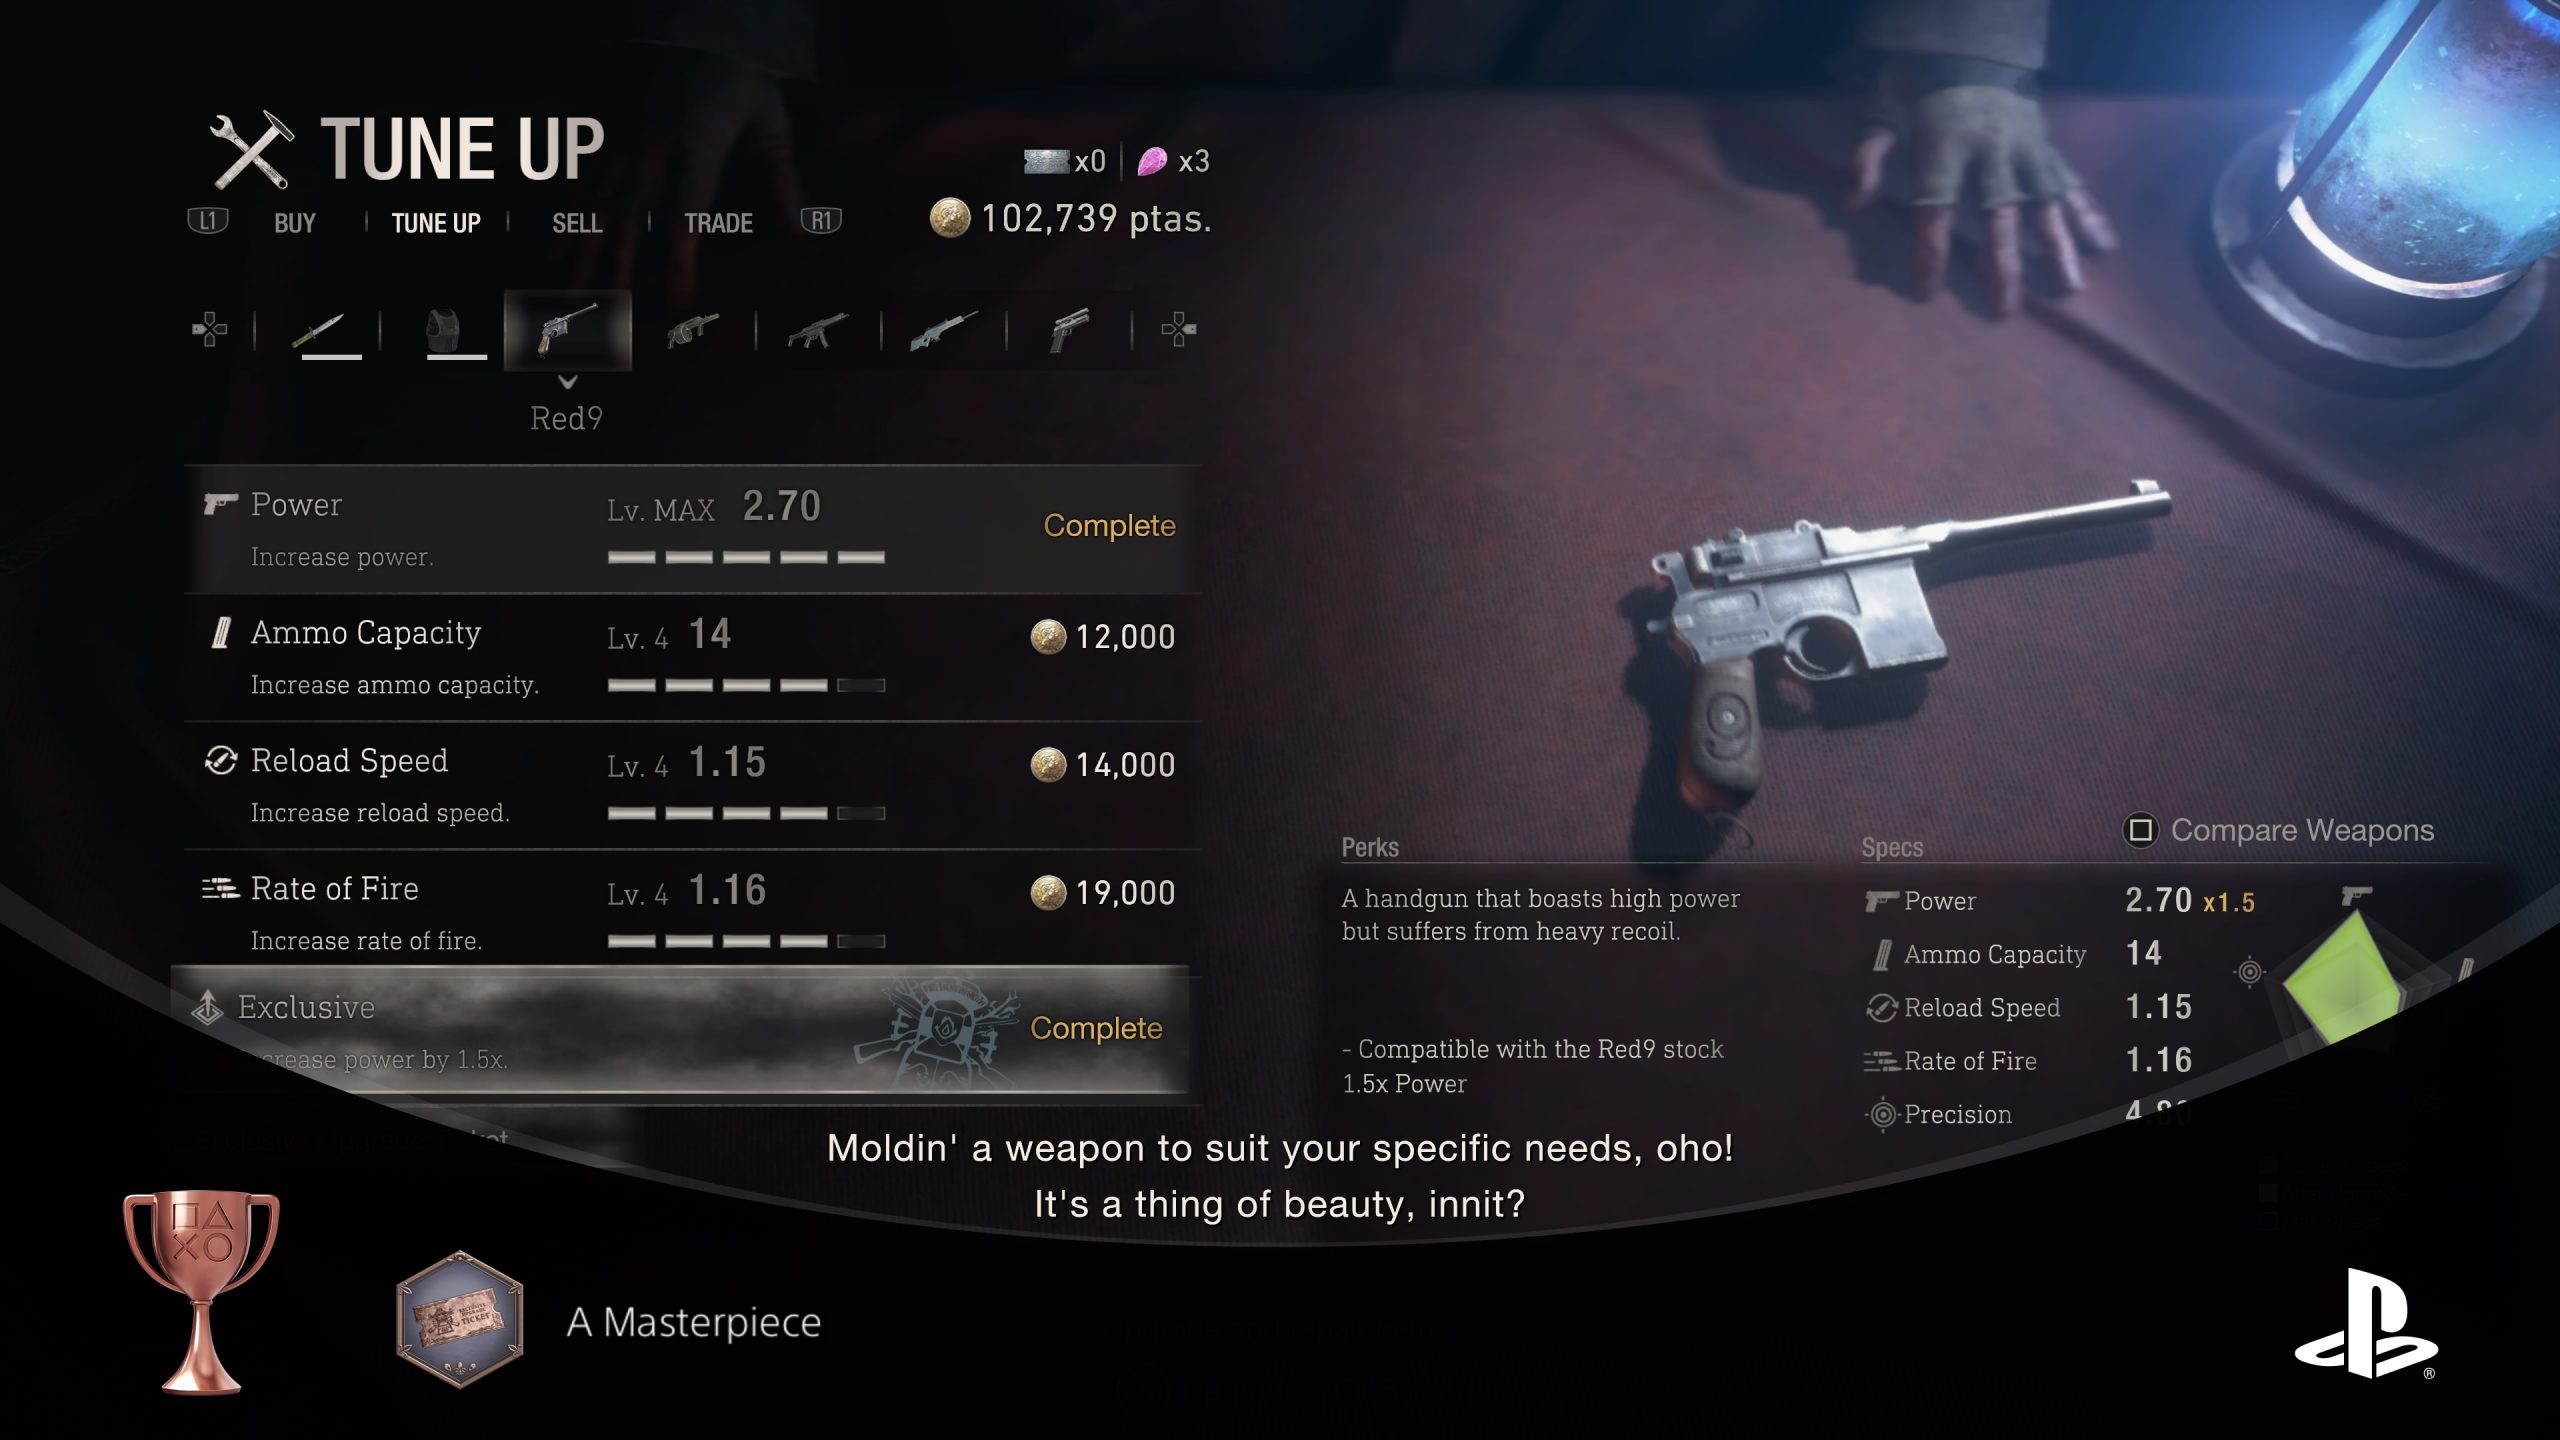 Resident Evil 4 Remake: How to Get Unlimited Ammo